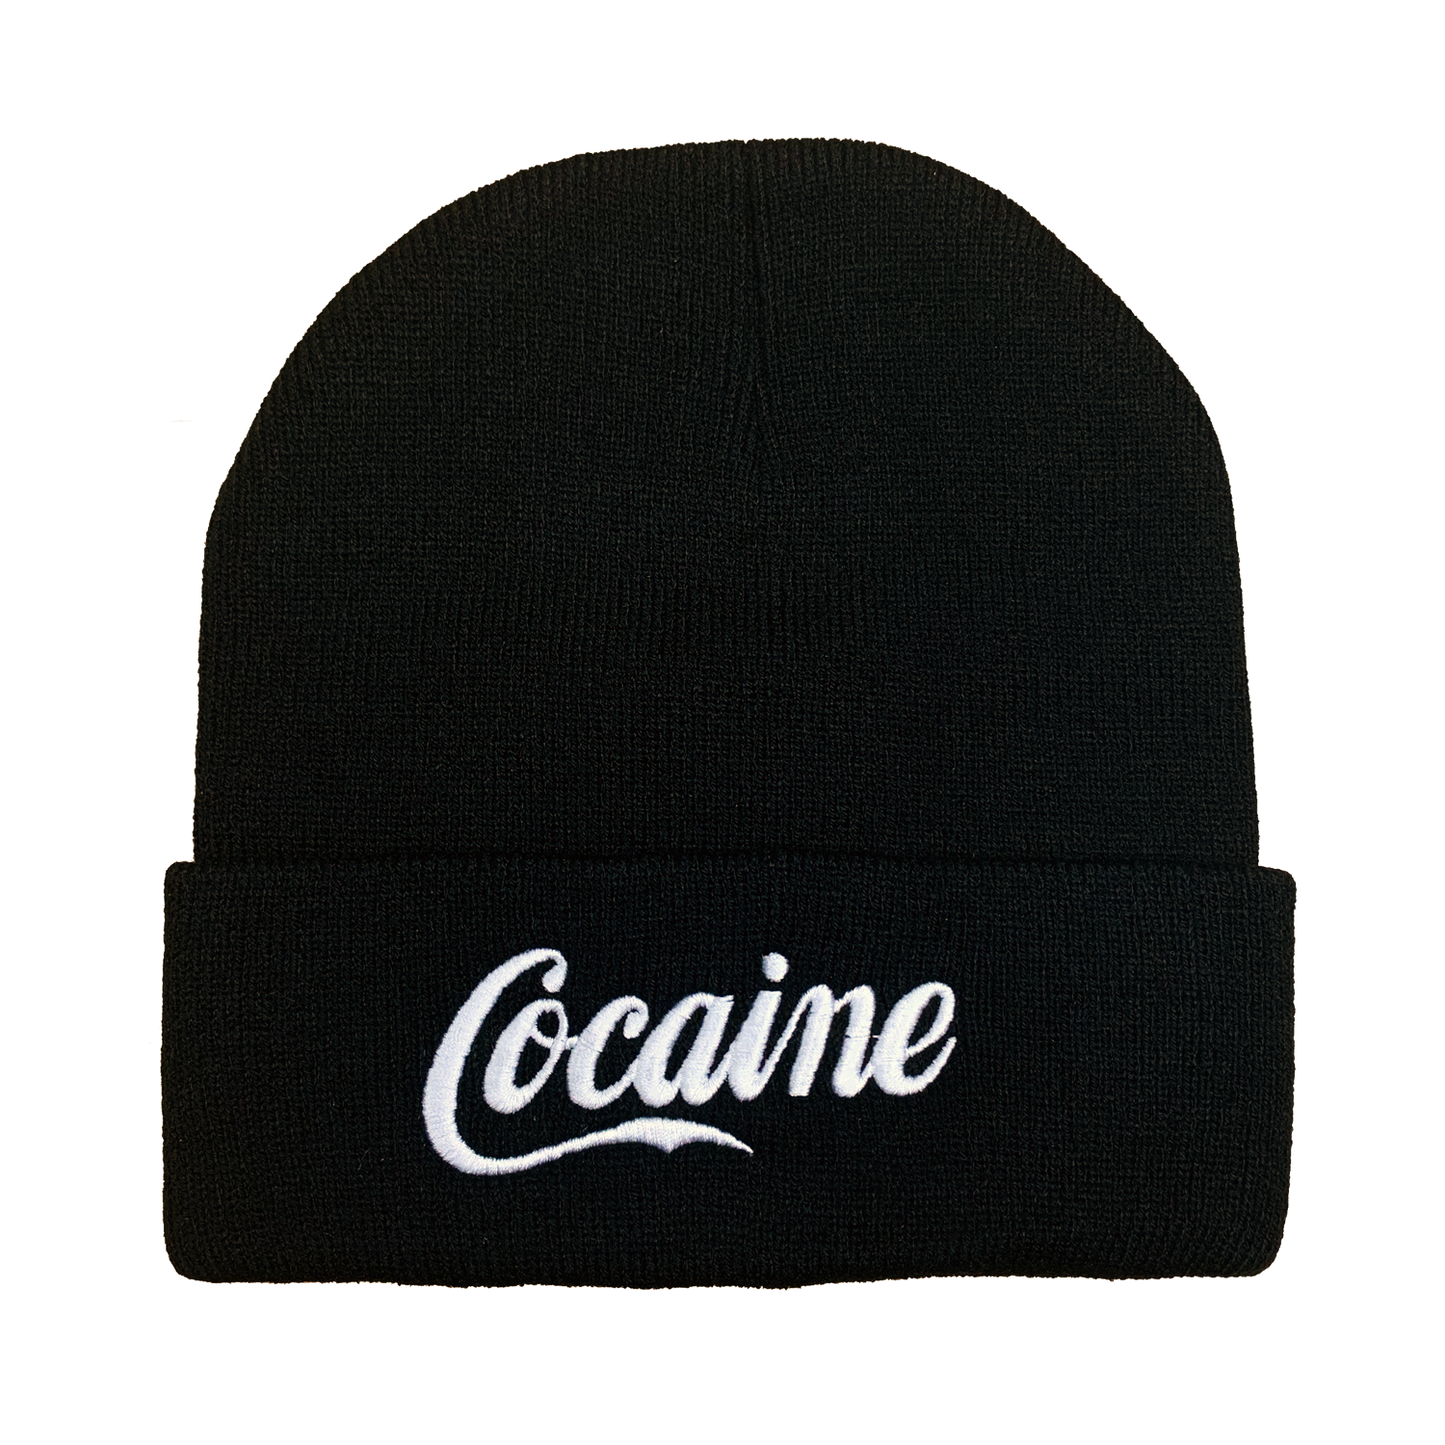 Cocaine Embroidered Beanie - UNMASKED Horror & Punk Patches and Decor